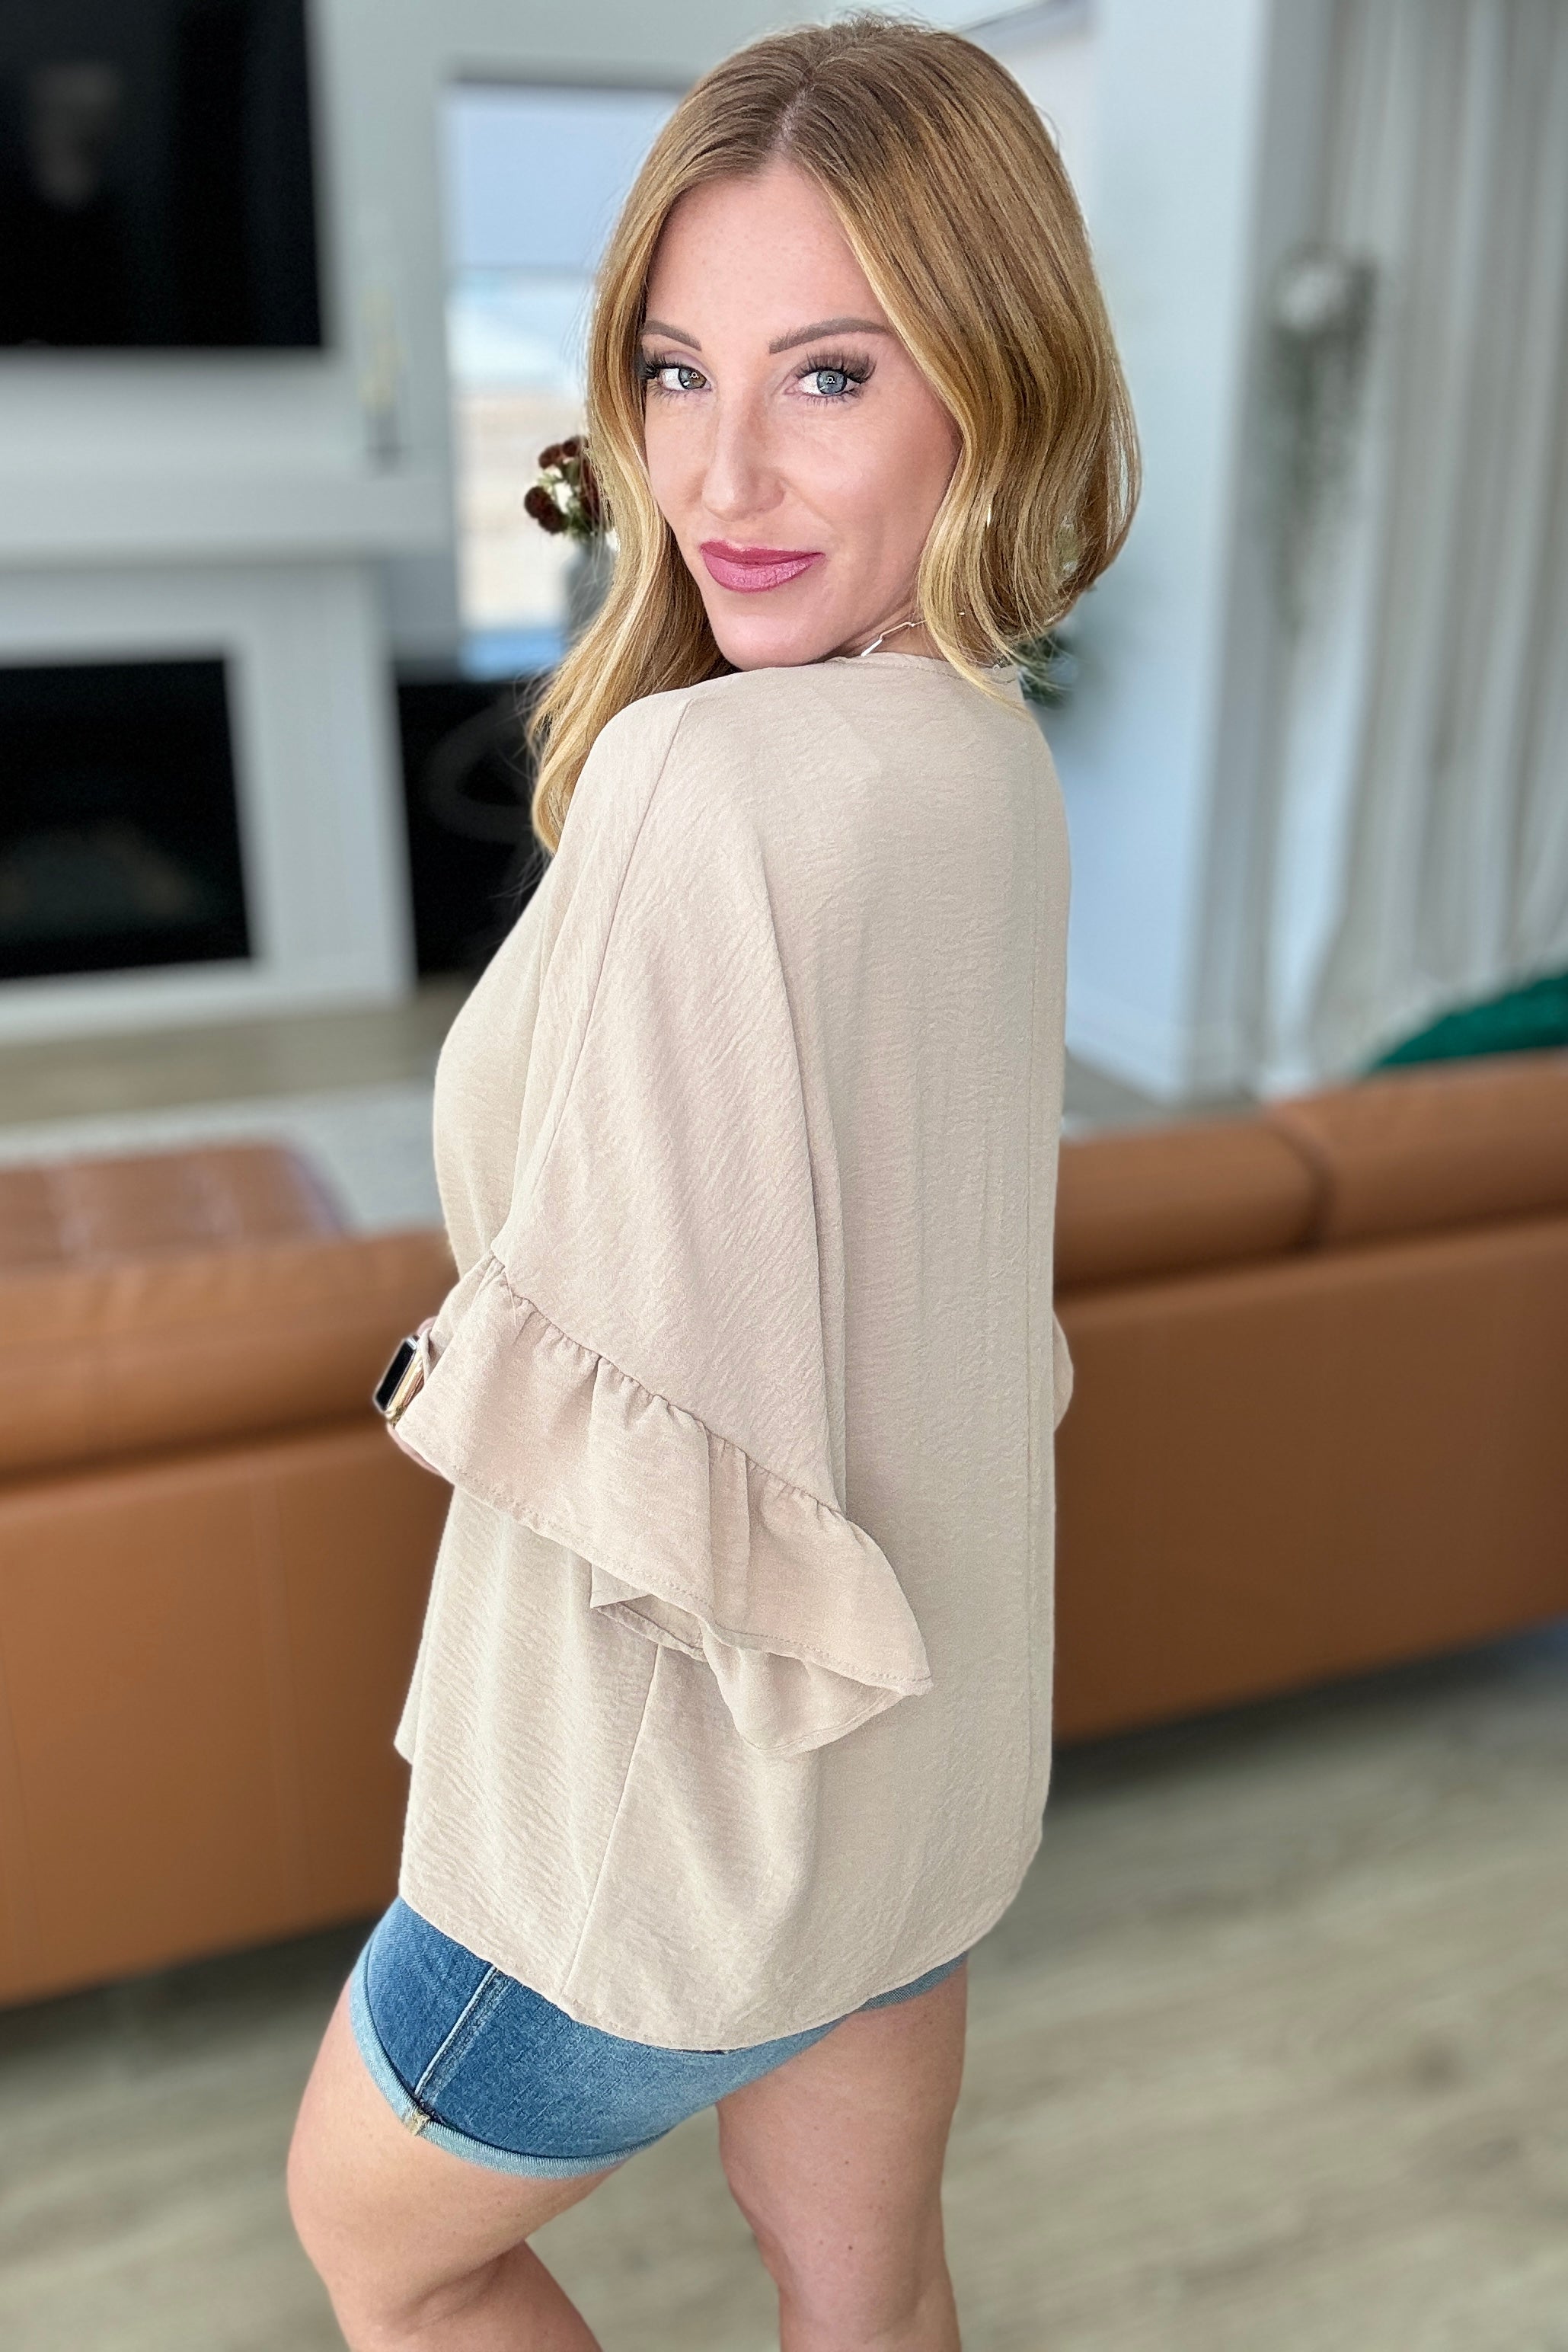 Airflow Peplum Ruffle Sleeve Top in Taupe Tops Ave Shops   